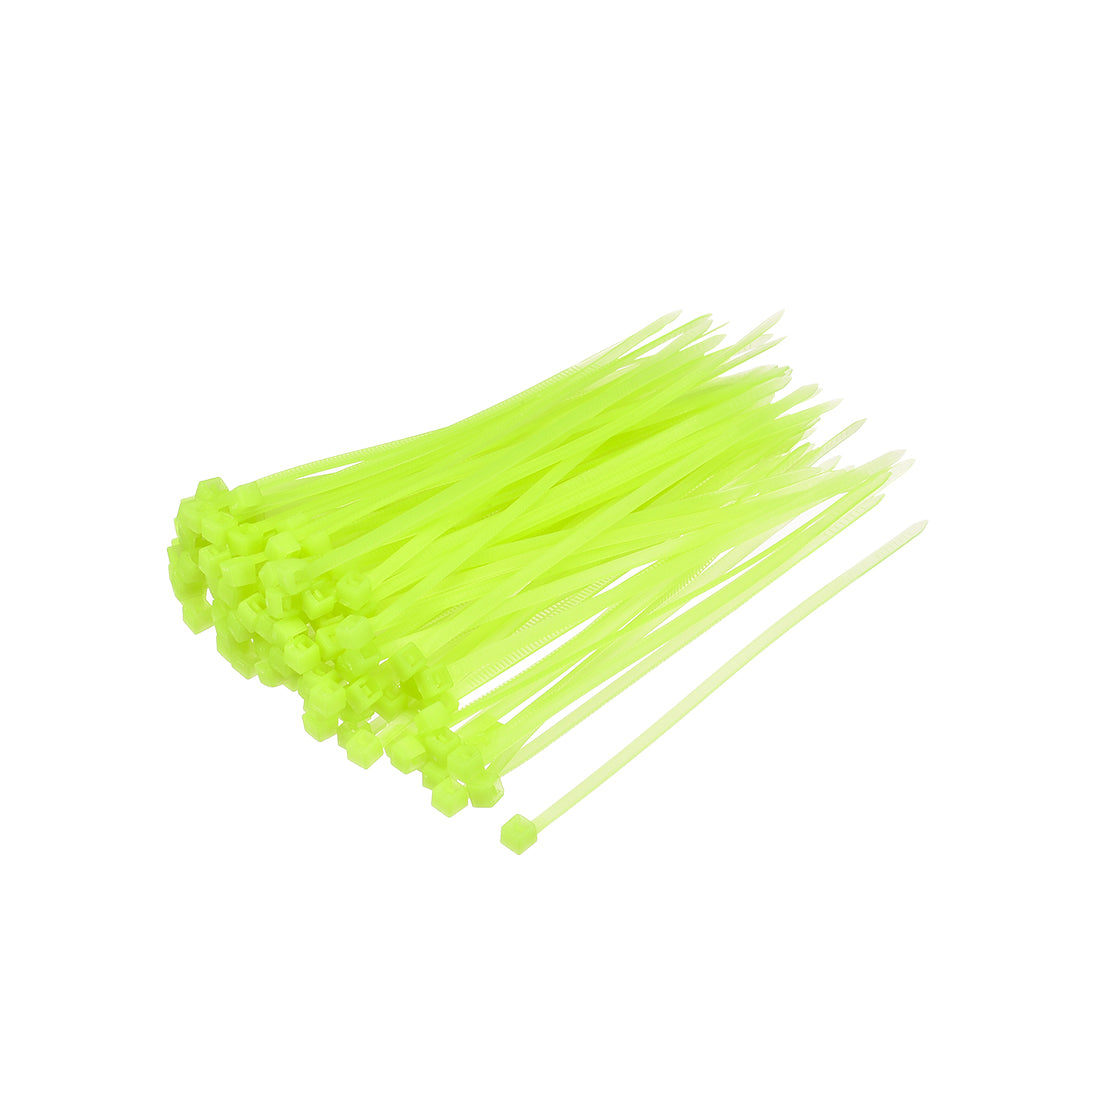 uxcell Uxcell Cable Zip Ties 100mmx2.5mm Self-Locking Nylon Tie Wraps Fluorescent Green 600pcs